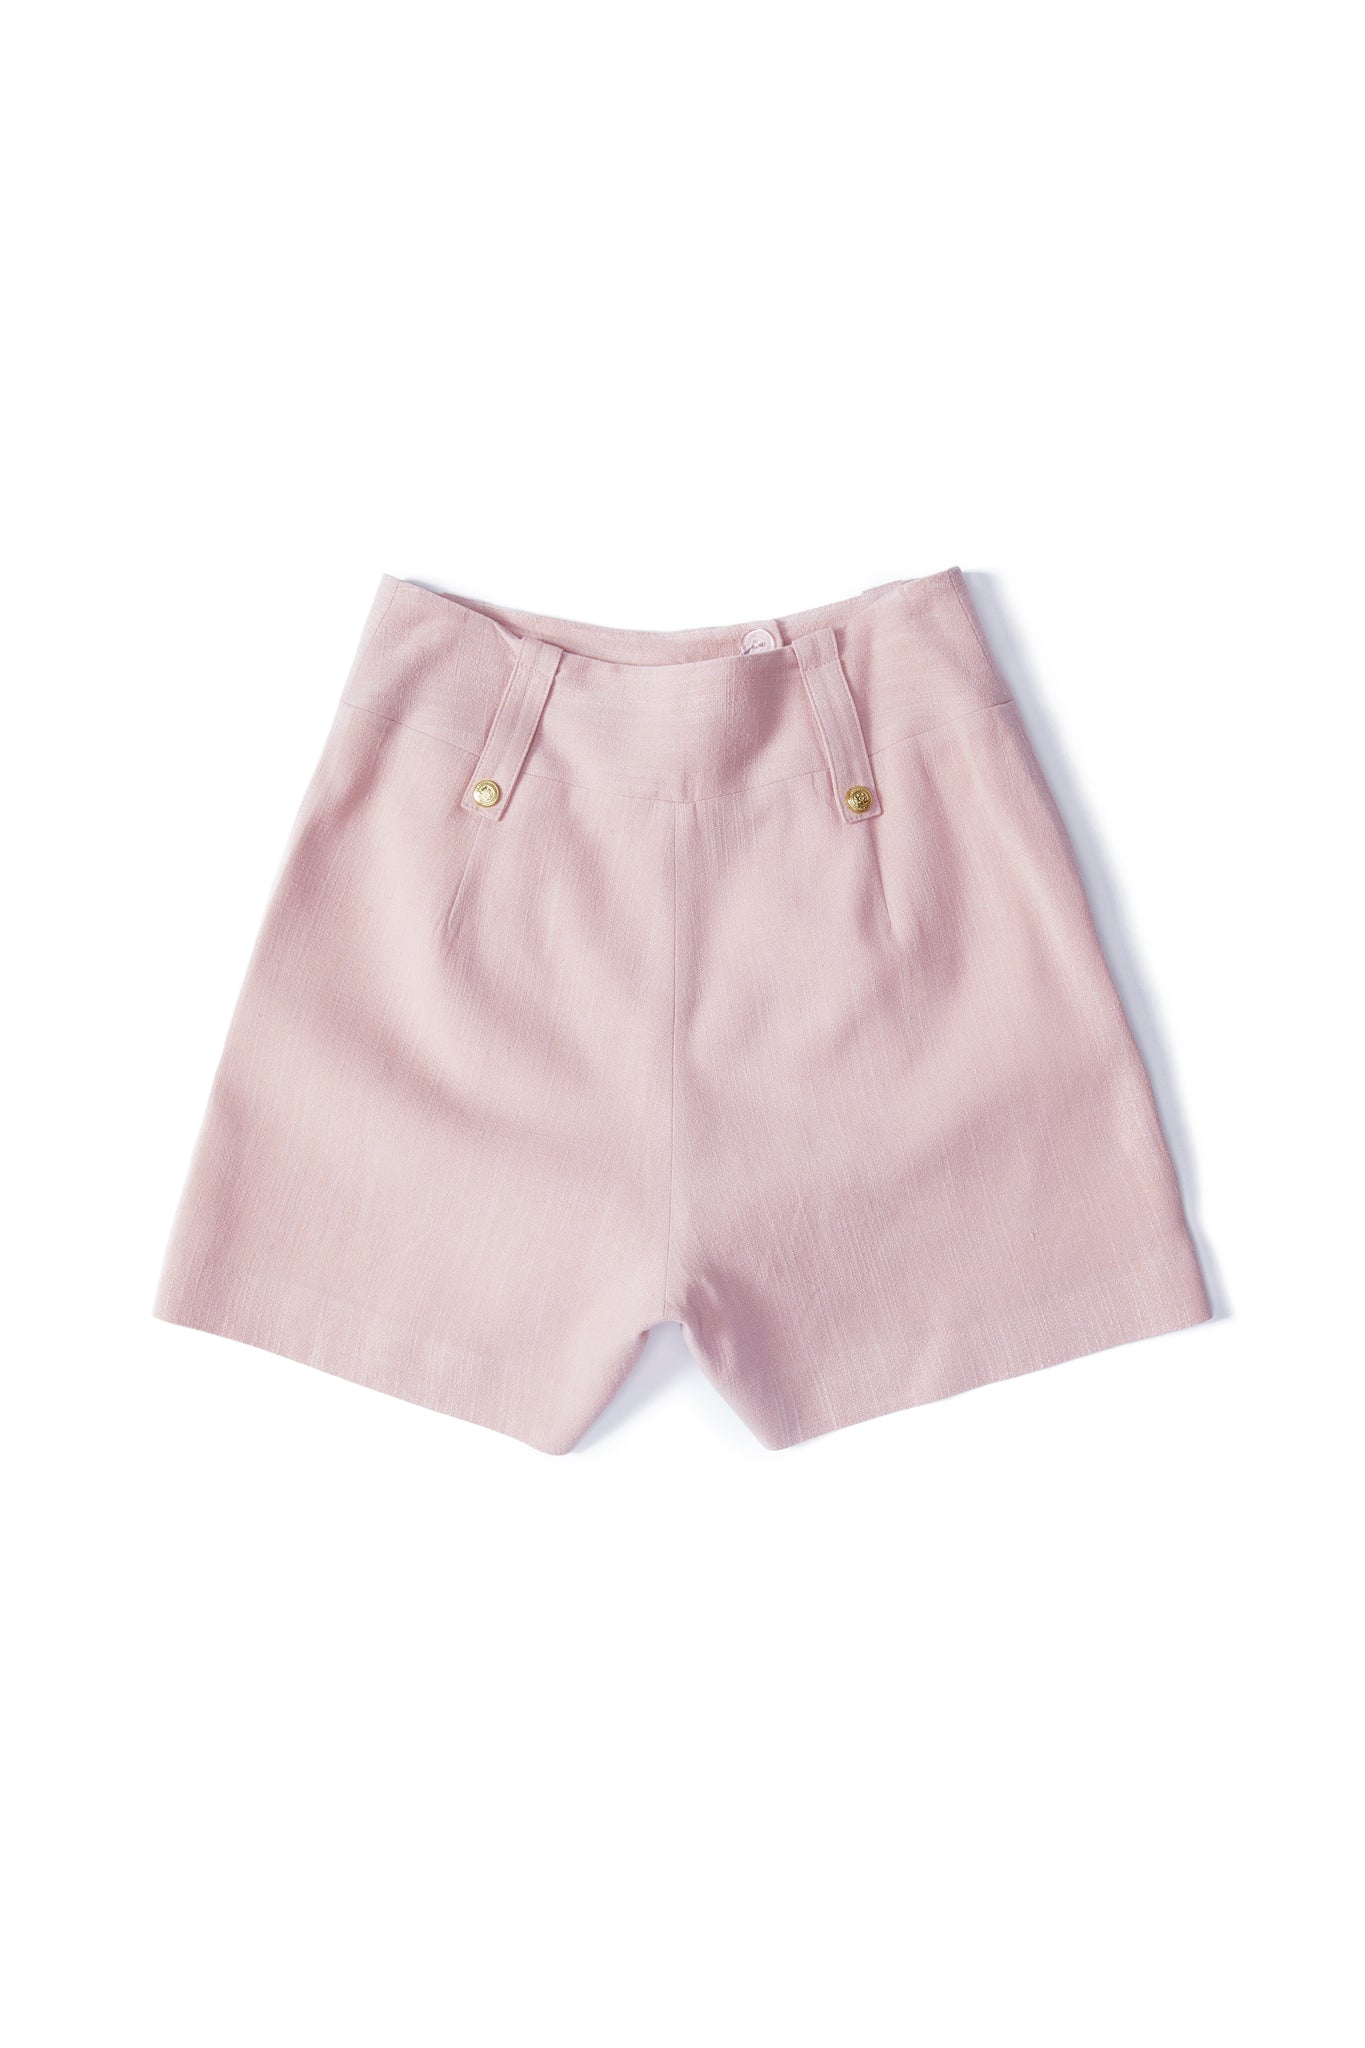 back of womens light pink linen tailored shorts with two single knife pleats and centre front zip fly fastening with two gold stud buttons